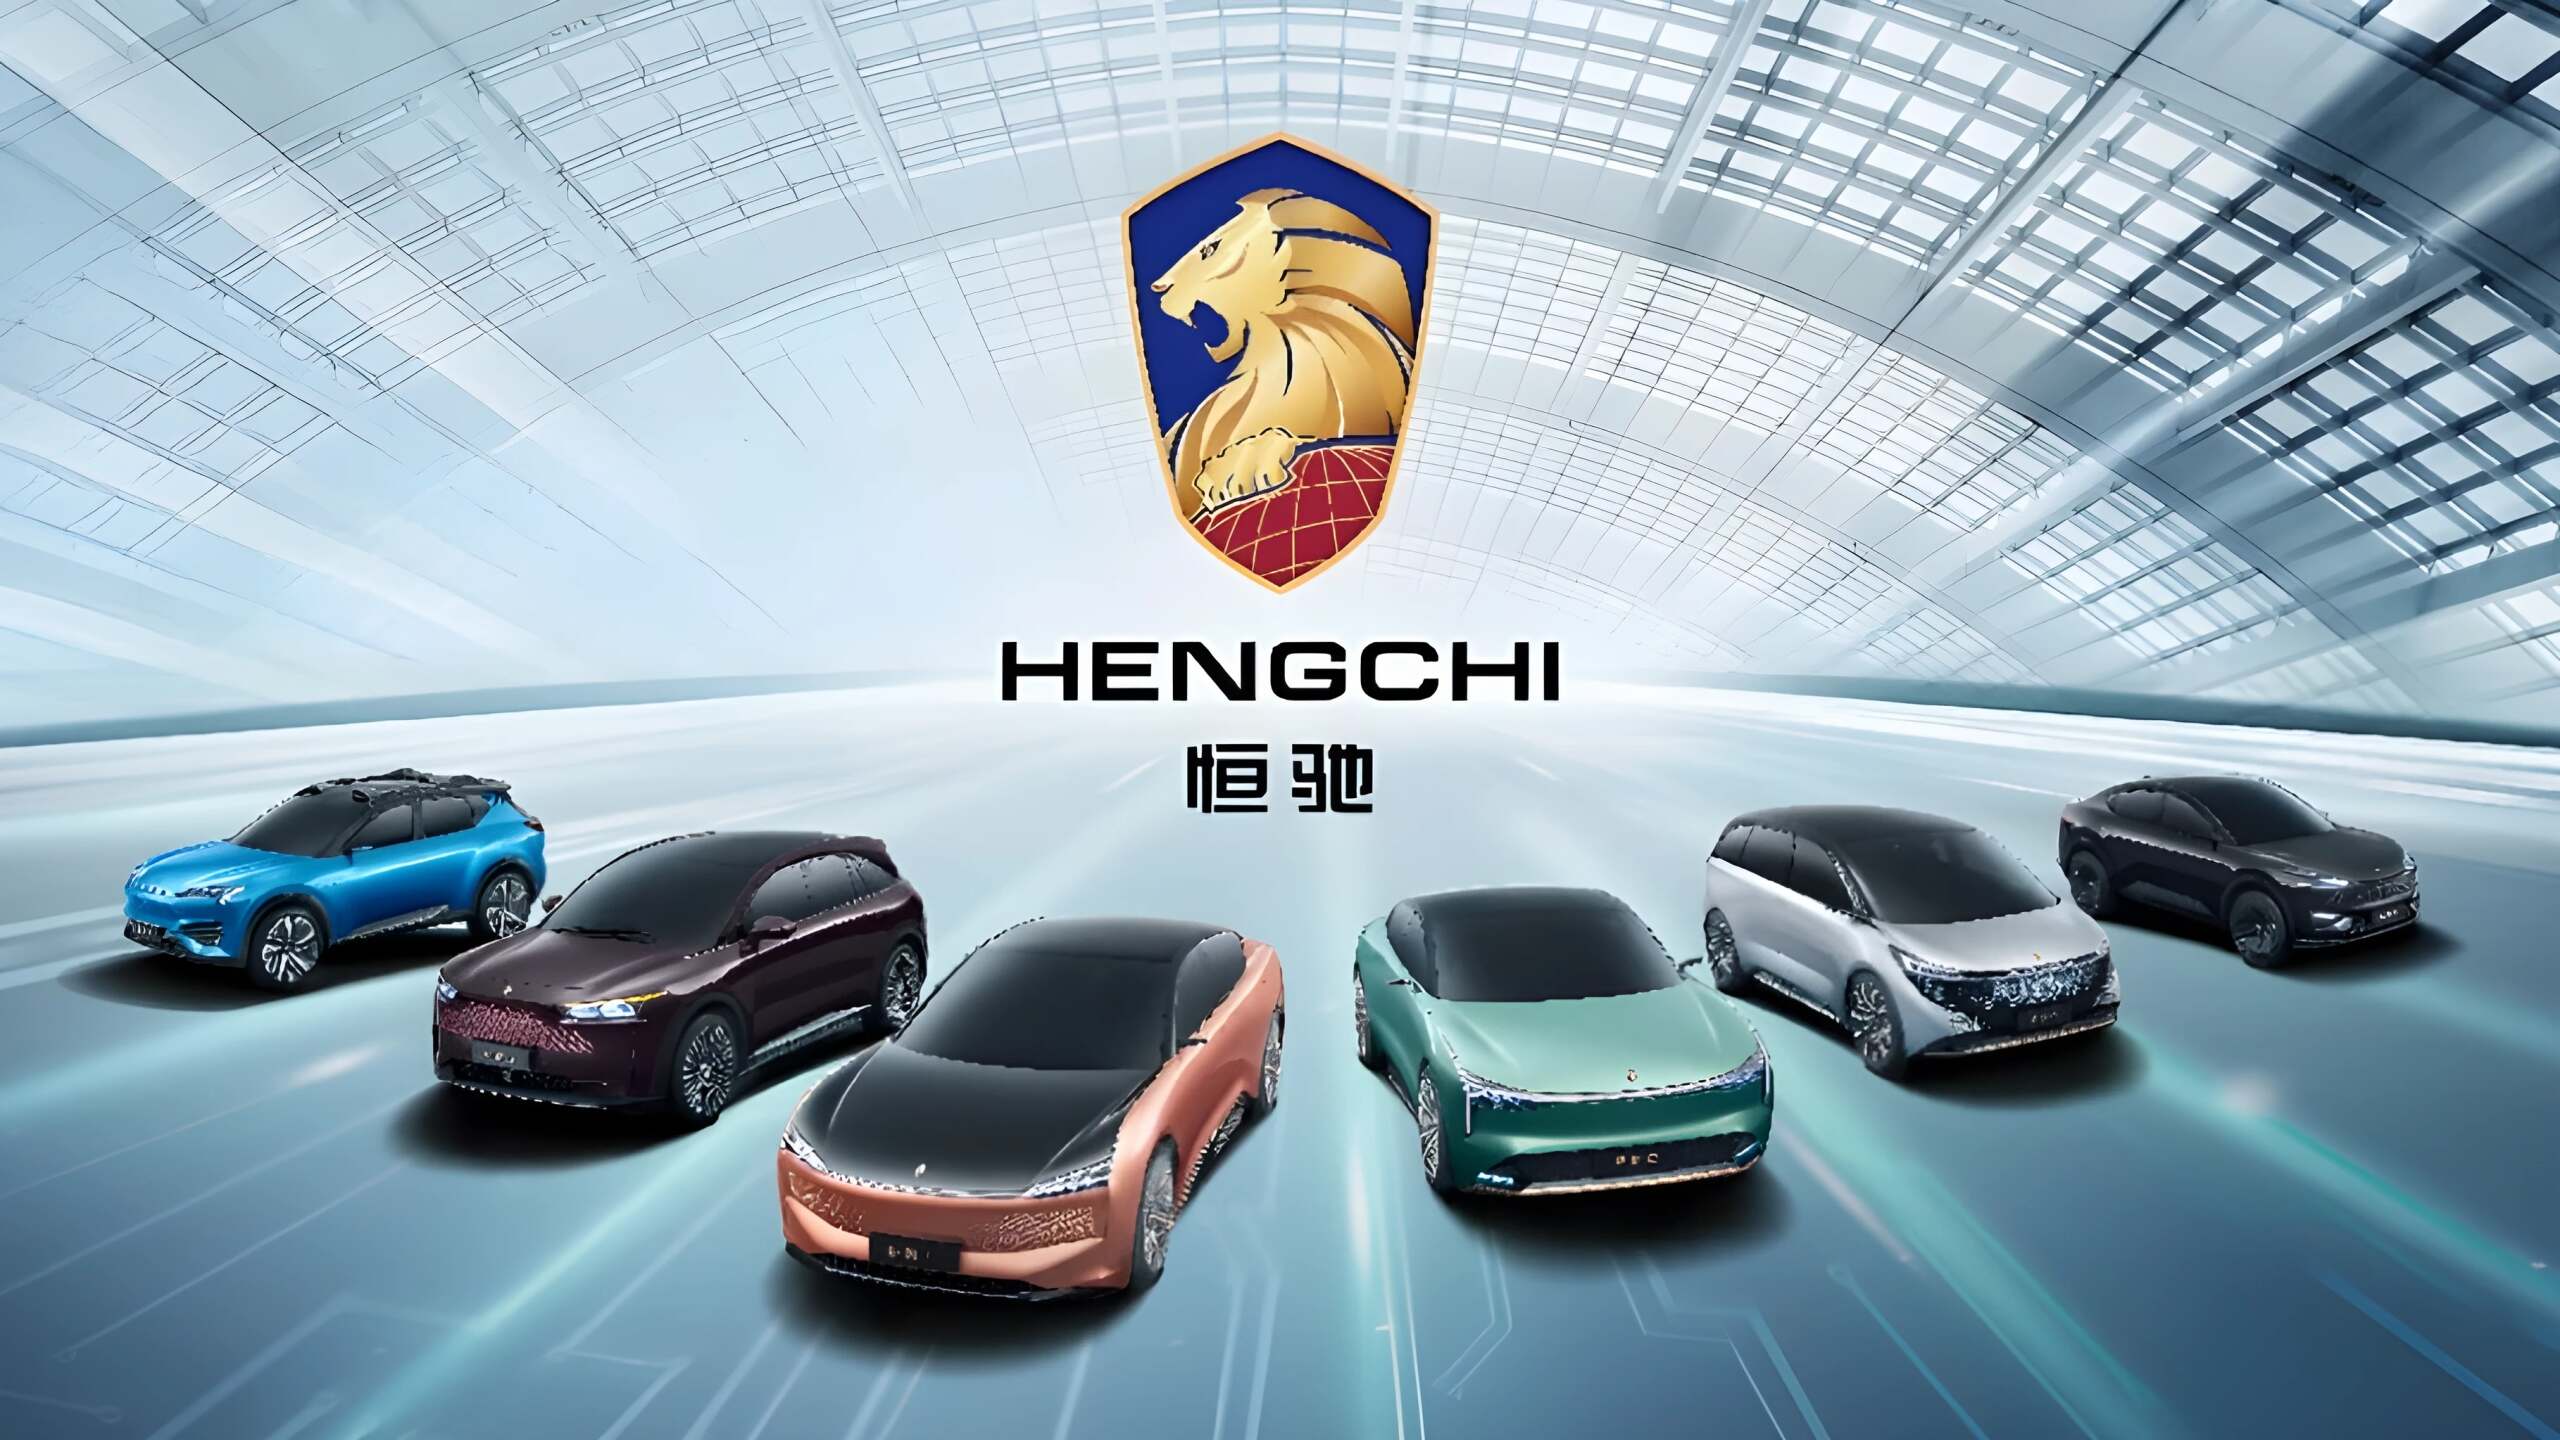 A Line Up Of The New Hengchi EVs